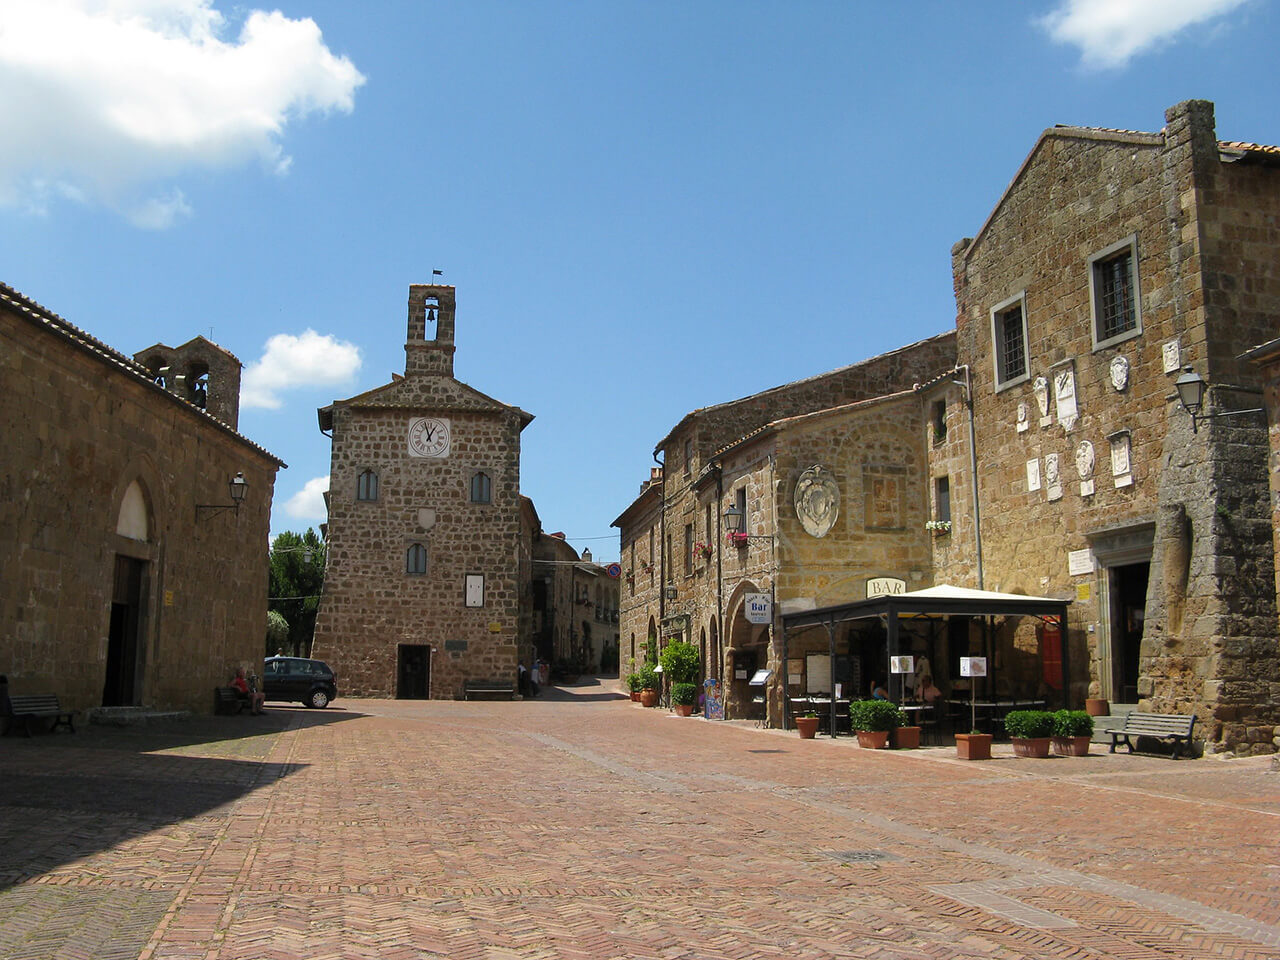 Piazza Pretorio in Sovana at lunchtime, with no people around